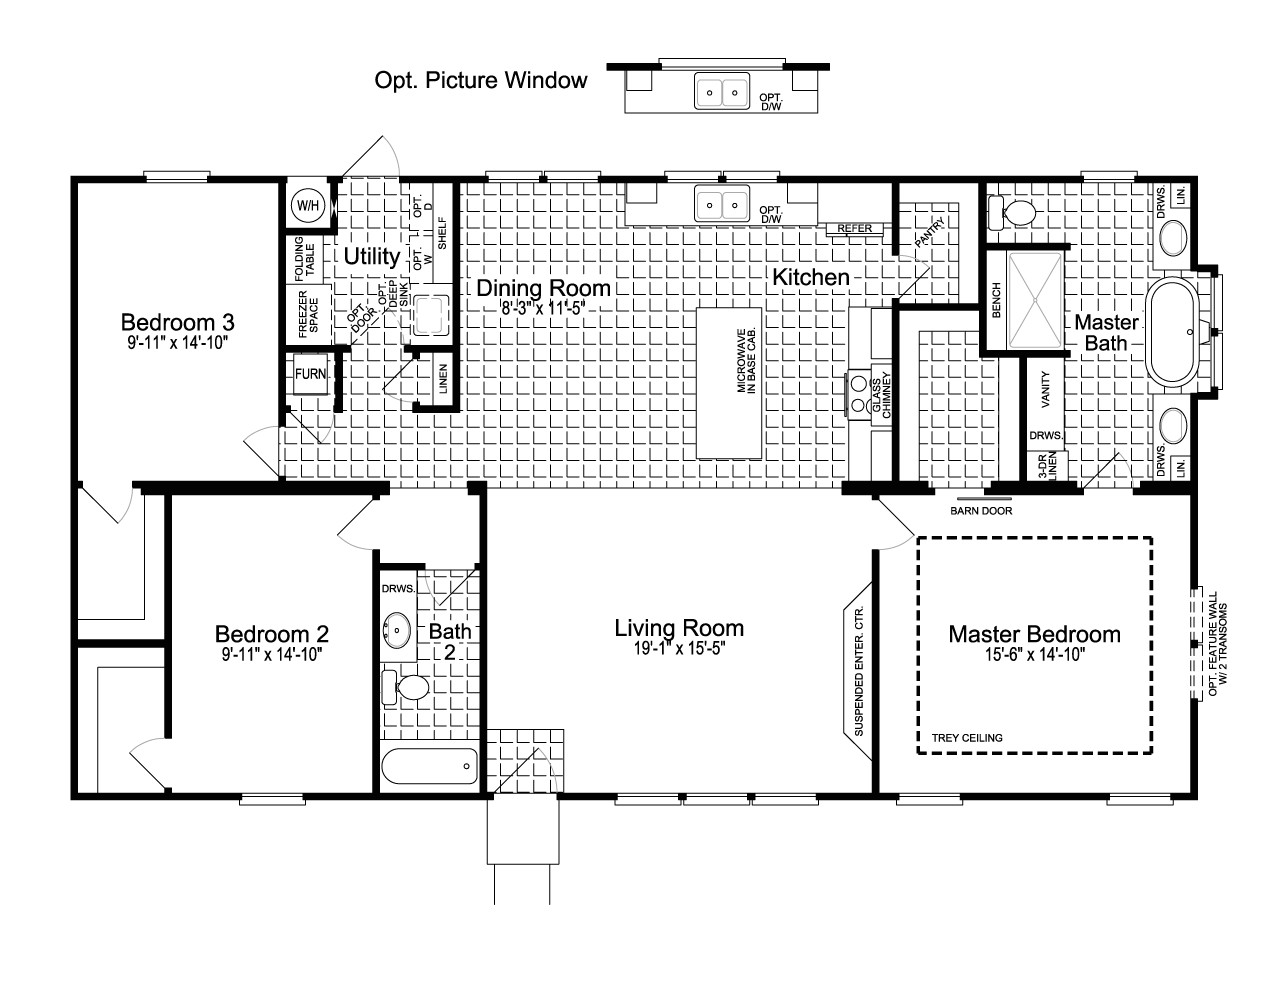 Urban Home Floor Plans View the Urban Homestead Floor Plan for A 1736 Sq Ft Palm